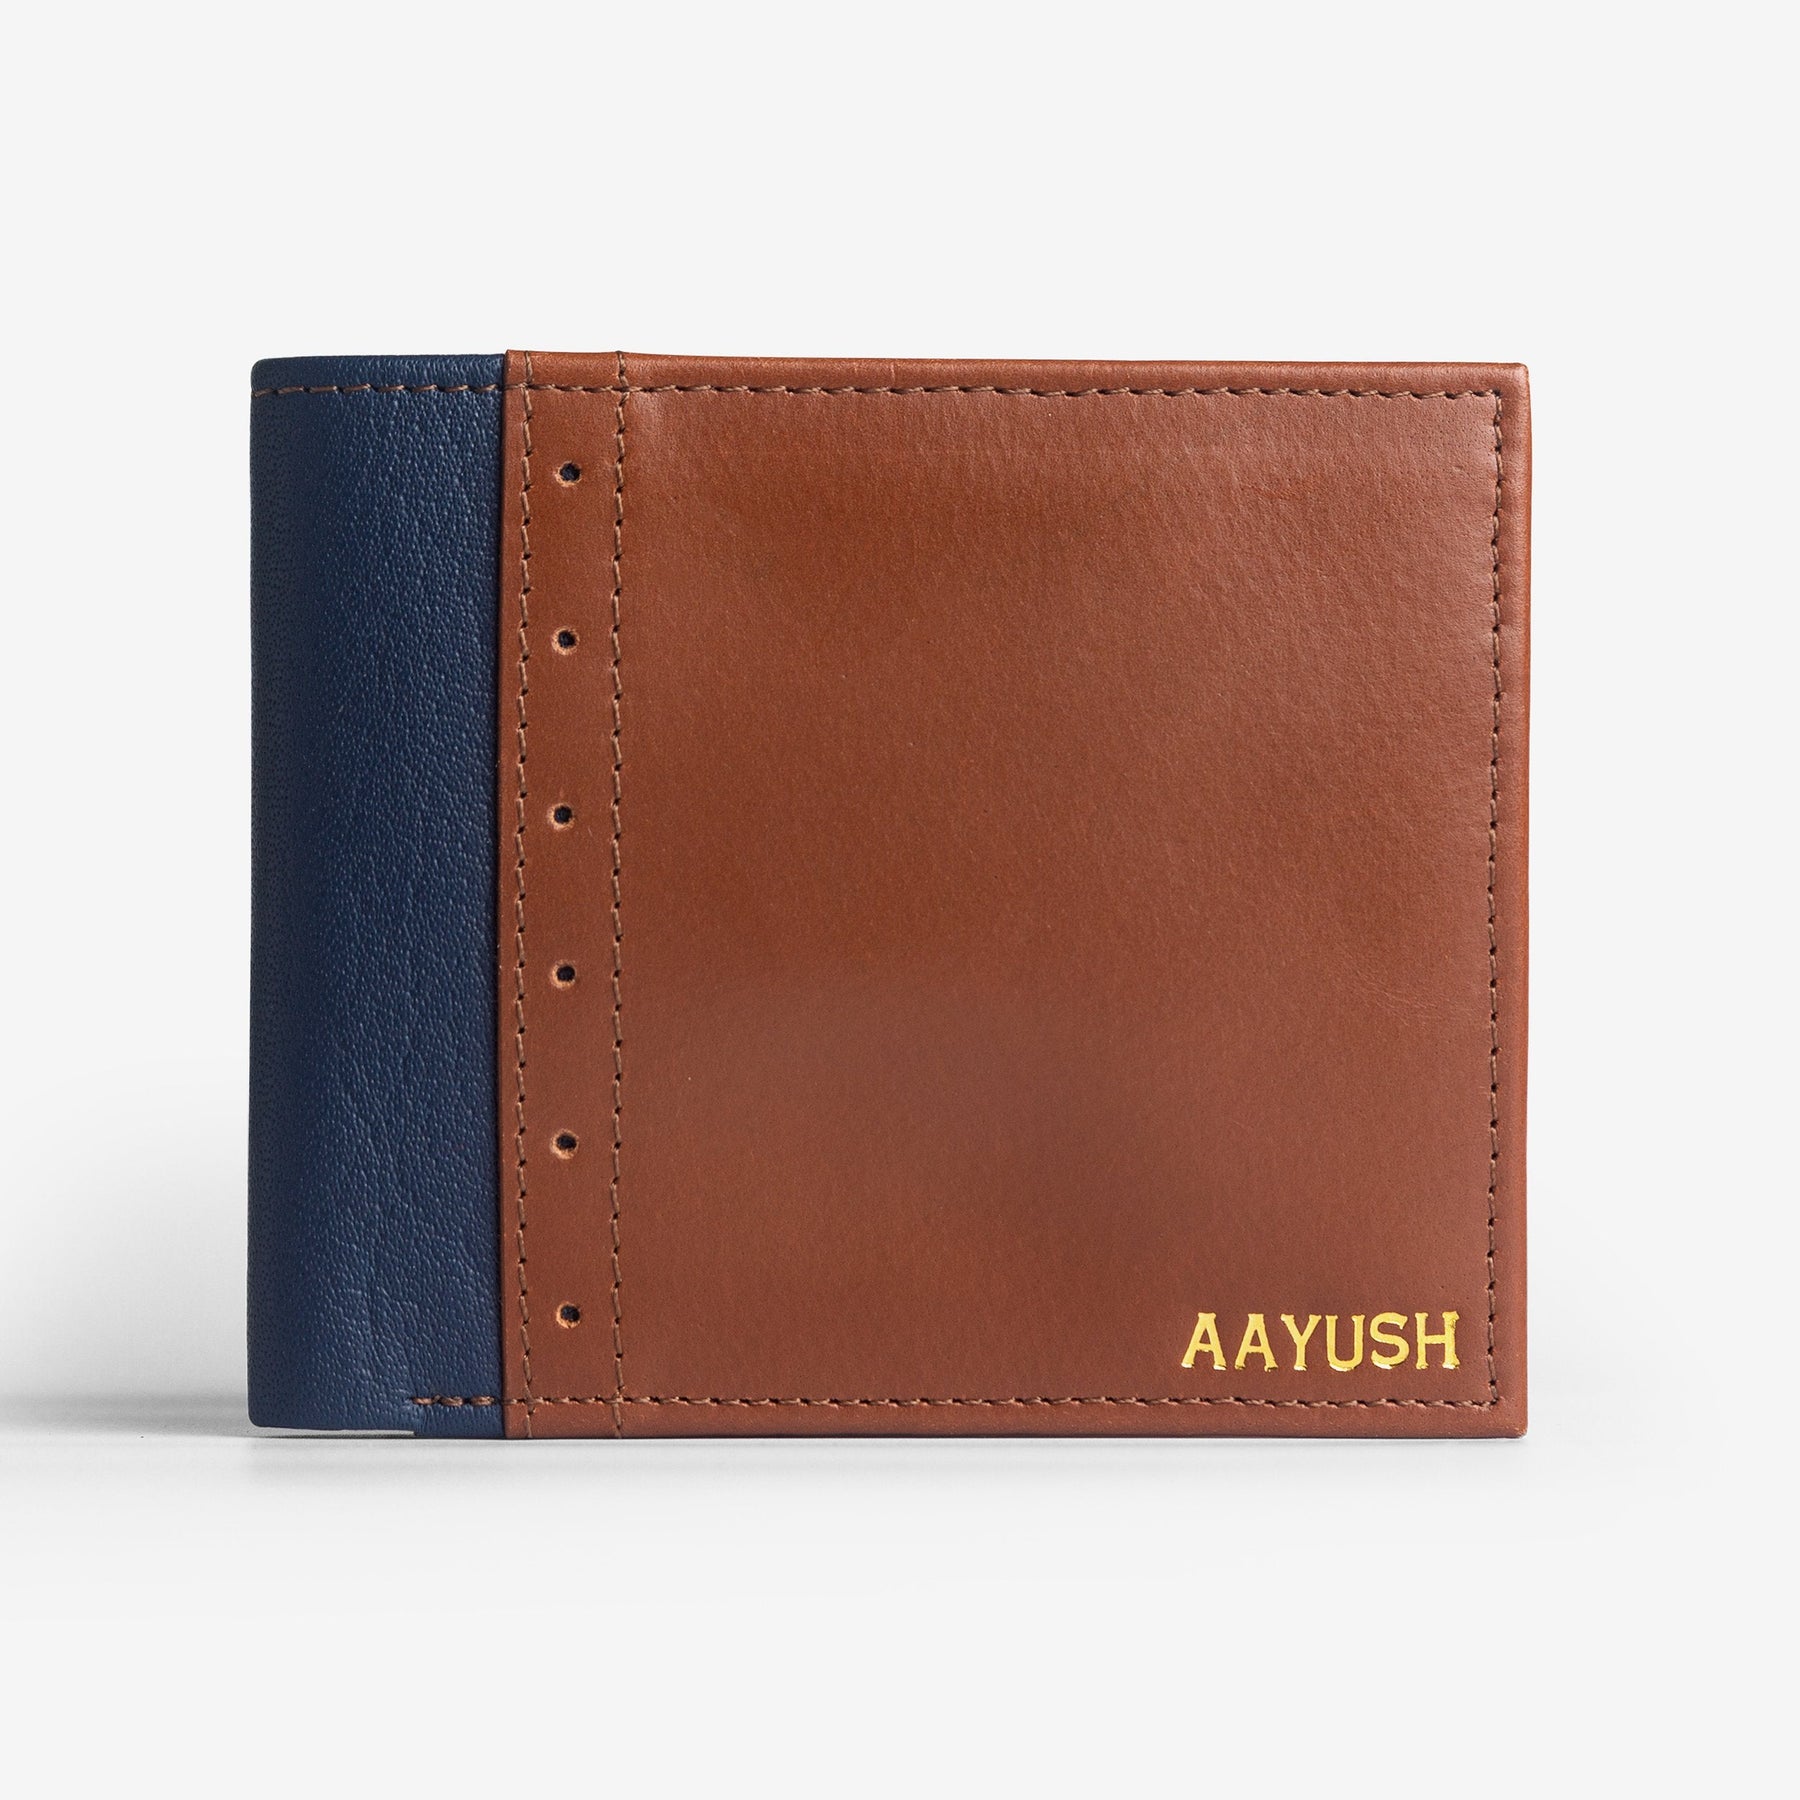 The Messy Corner Mens Wallet Personalized Leather Men's Wallet - Brown